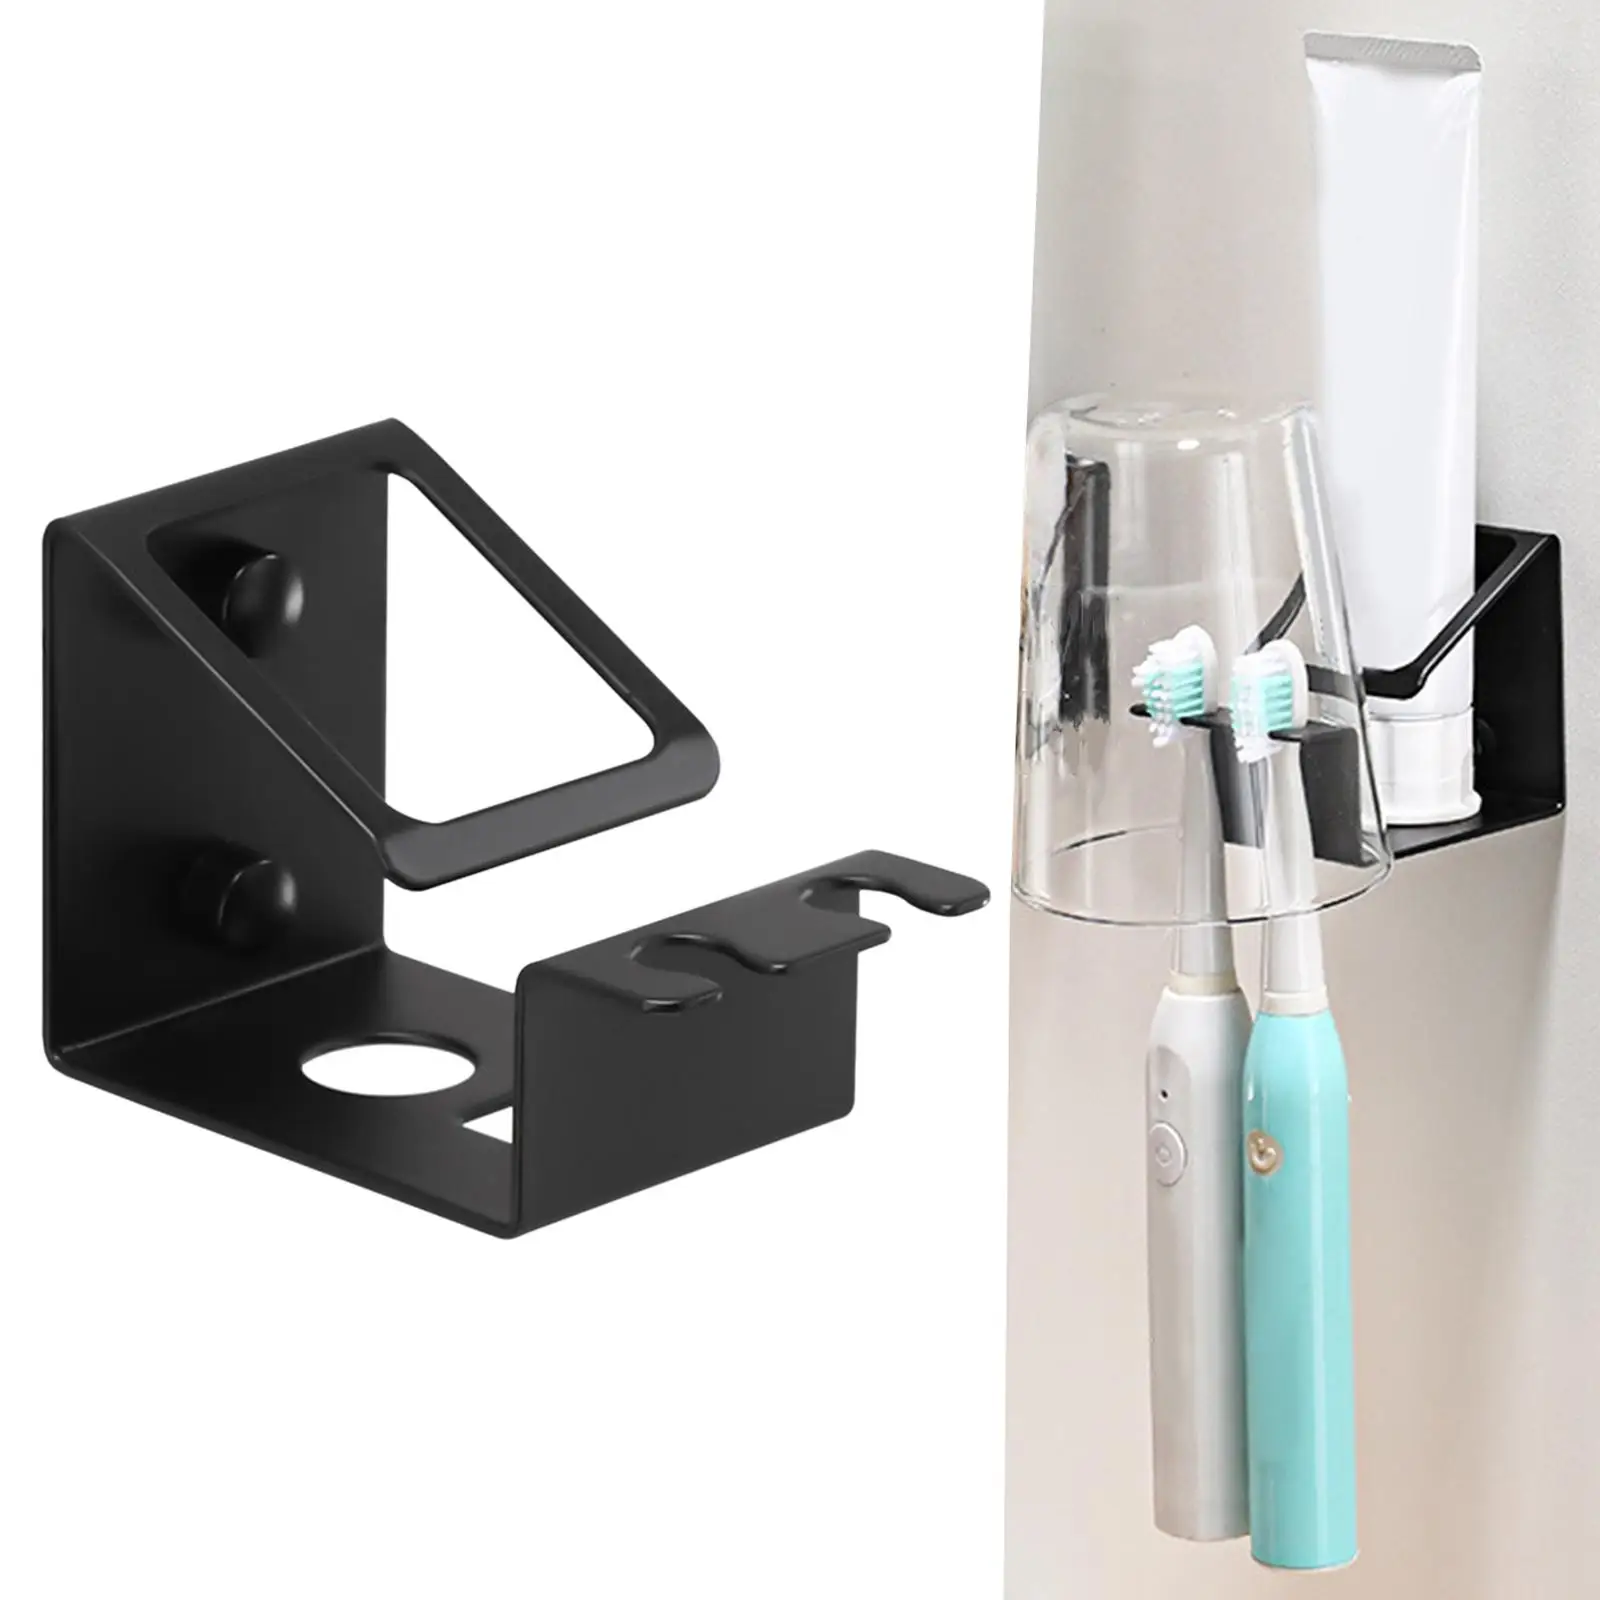 Self Adhesive Tooth Brush Storage Organizer Accessories Toothpaste Storage Rack Shelf Stand Multi Functional Black for Shower